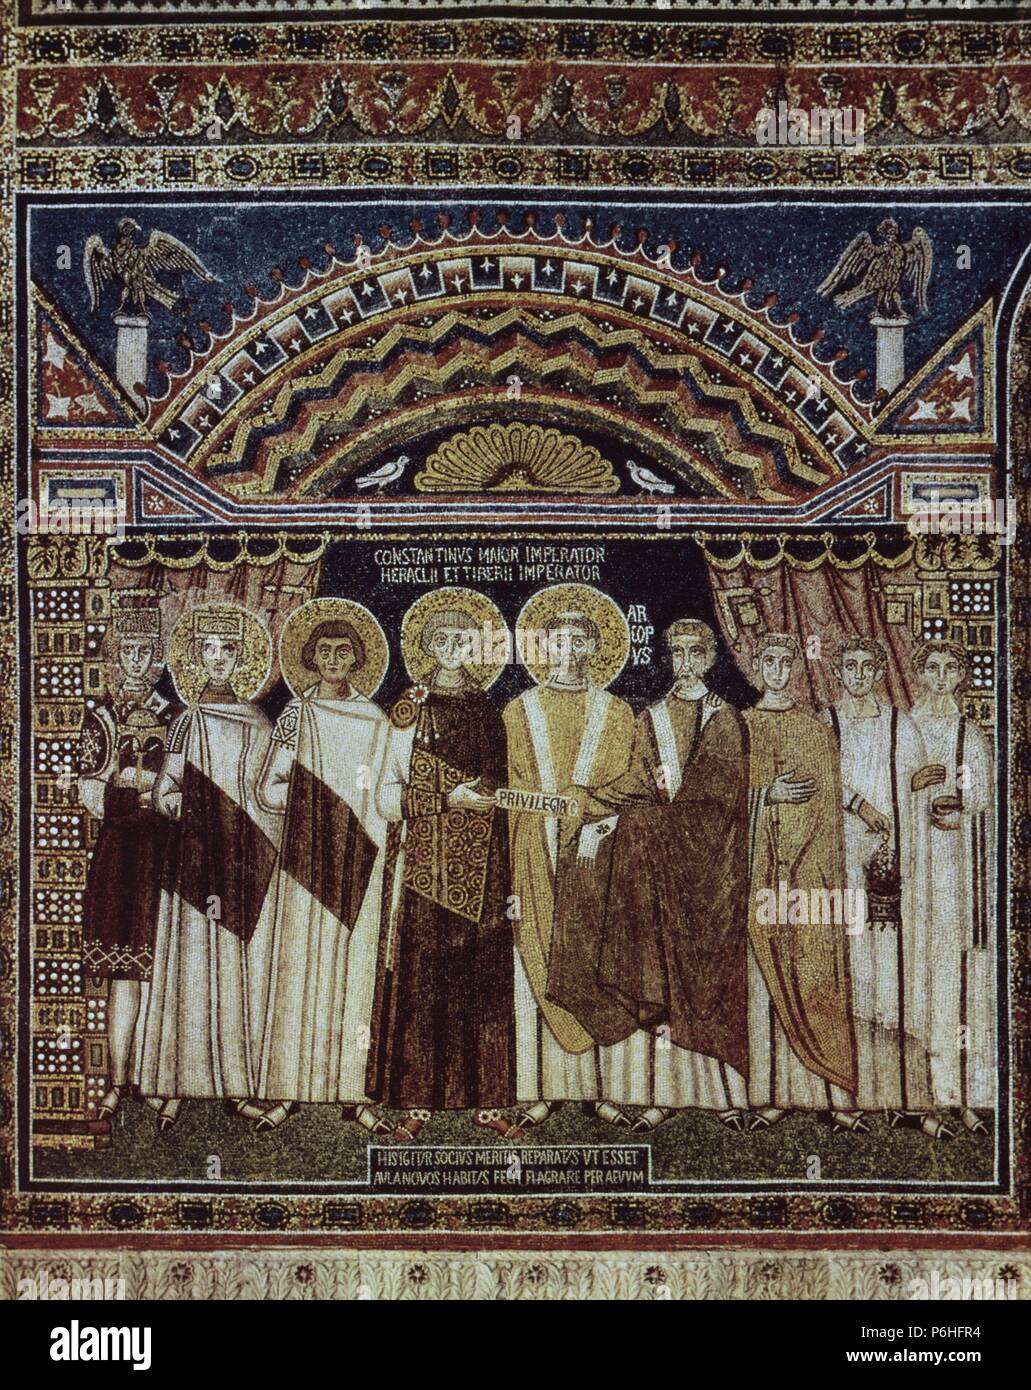 Constantine IV (652-685). Byzantine Emperor from and his retinue granting privilege to the Ravennate church. Mosaic. Basilica of Sant'Apollinare in Classe. Ravenna. Italy. Stock Photo